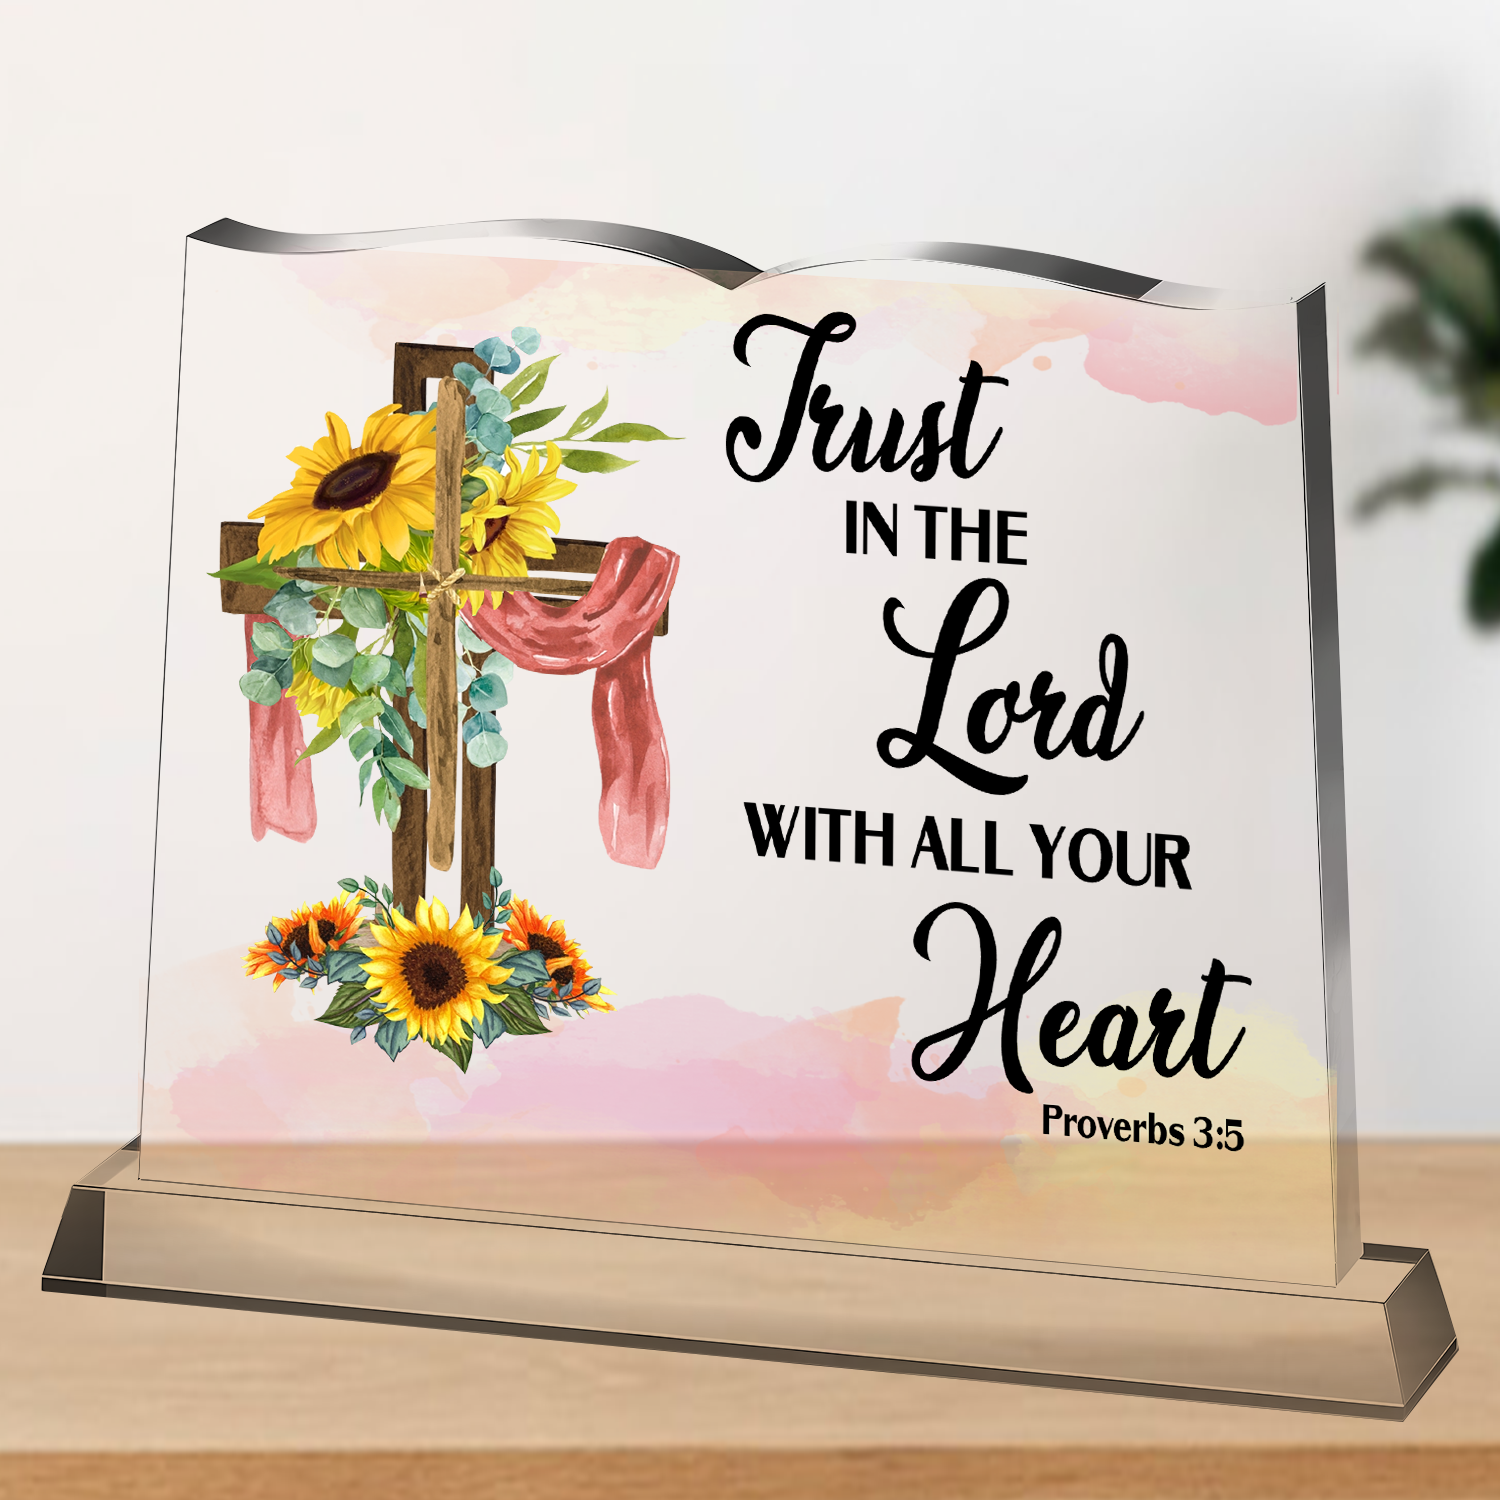 Trust In The Lord Book Shaped Acrylic Plaque Christian Gifts Bible Verses Religious Gifts